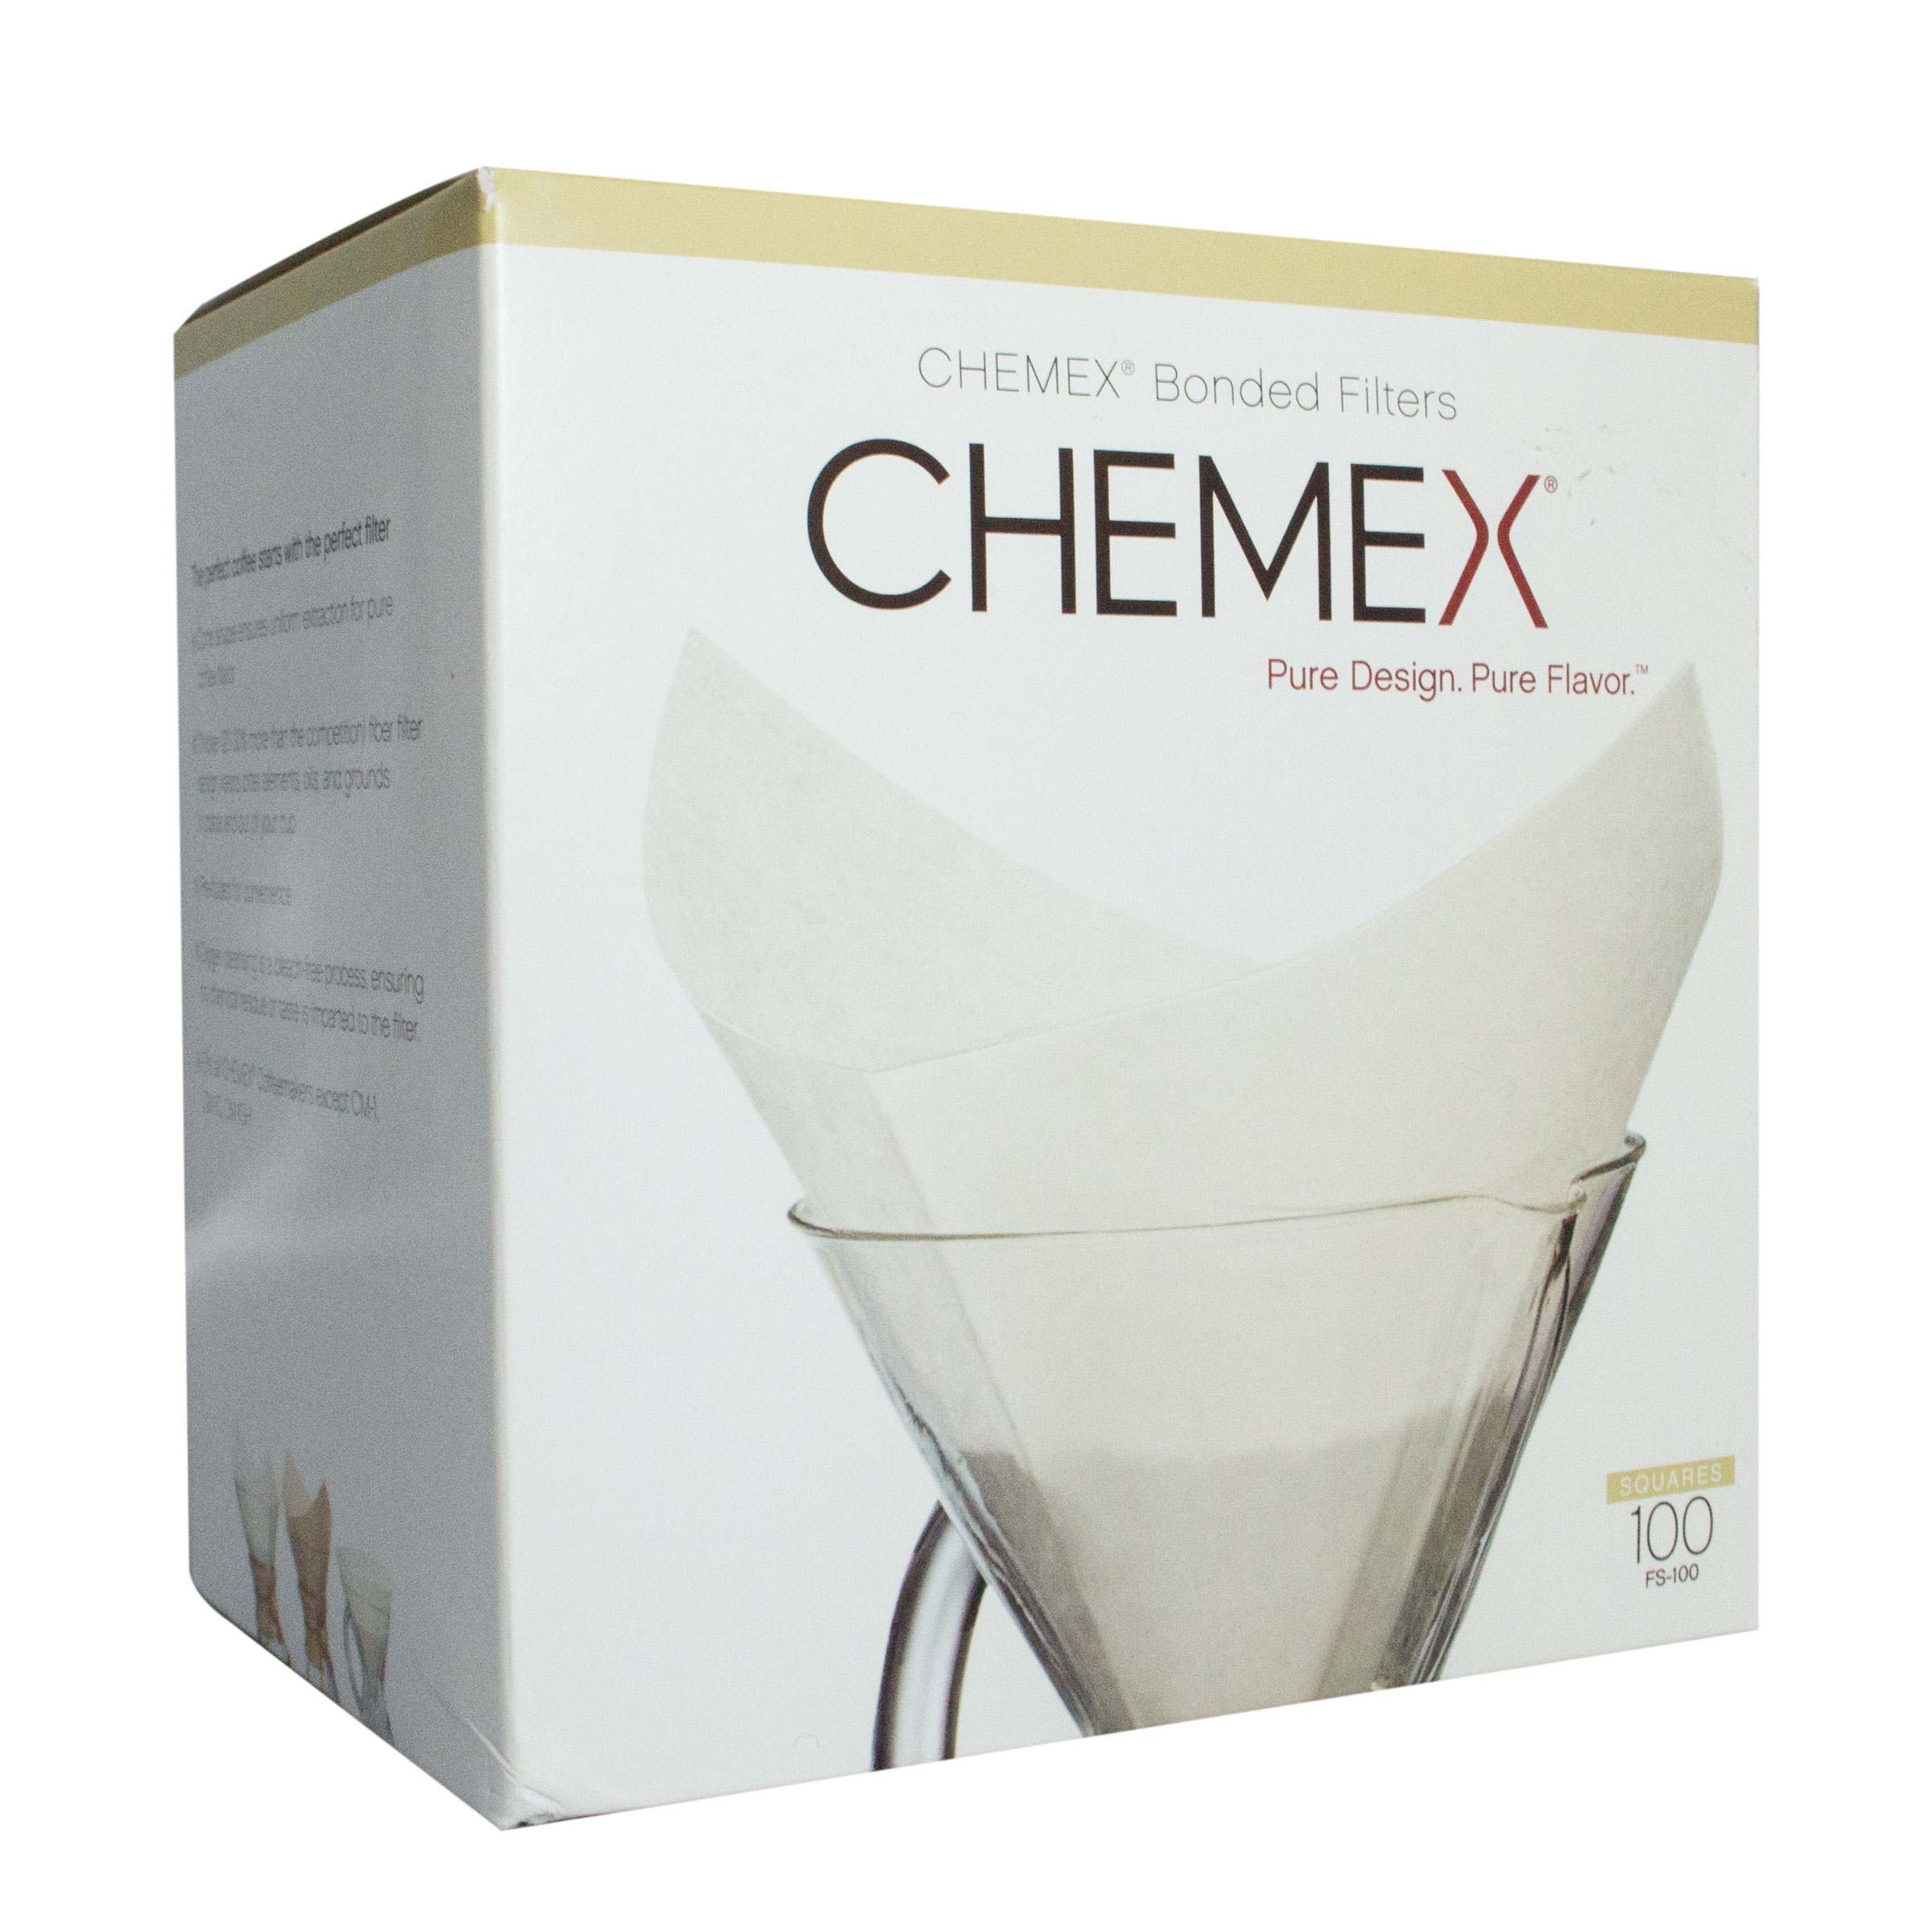 Picture Chemex Square Bonded Filters (100 ct.)